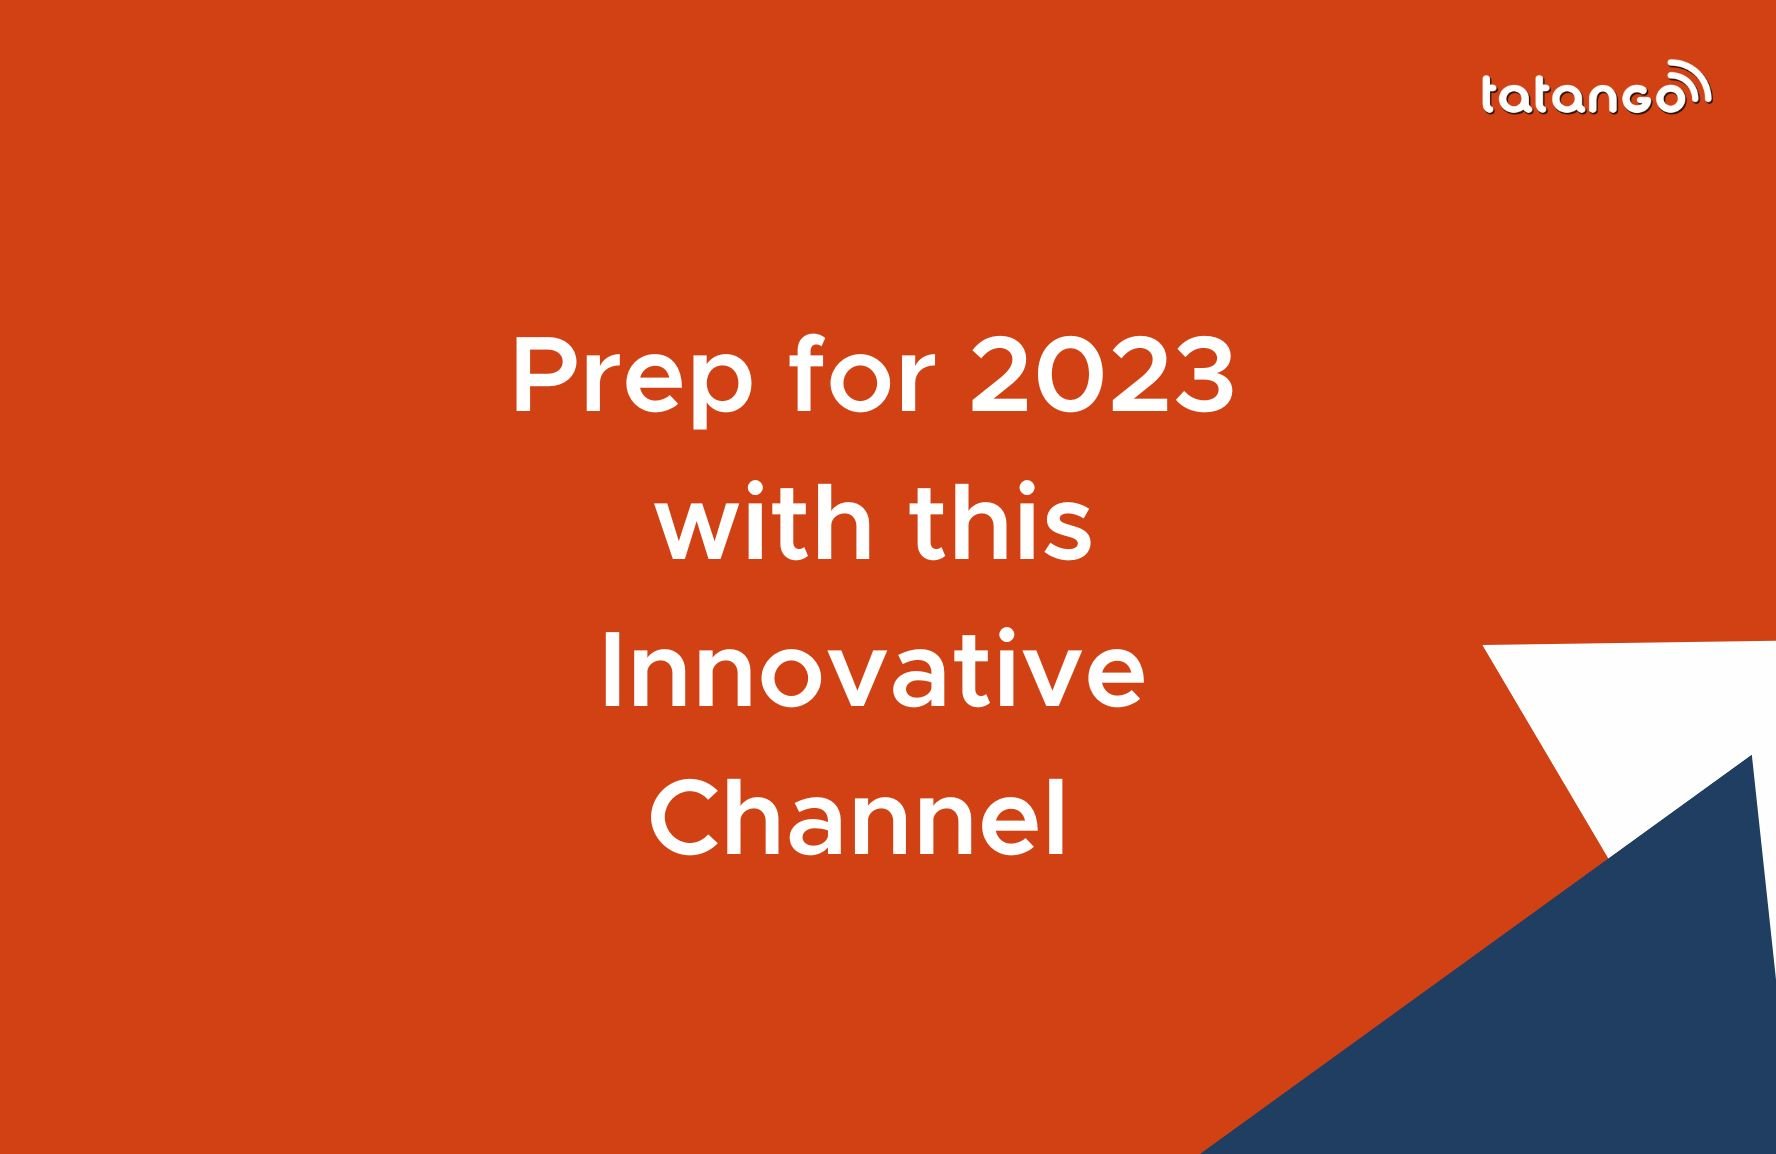 Prep for 2023 with this Innovative Channel